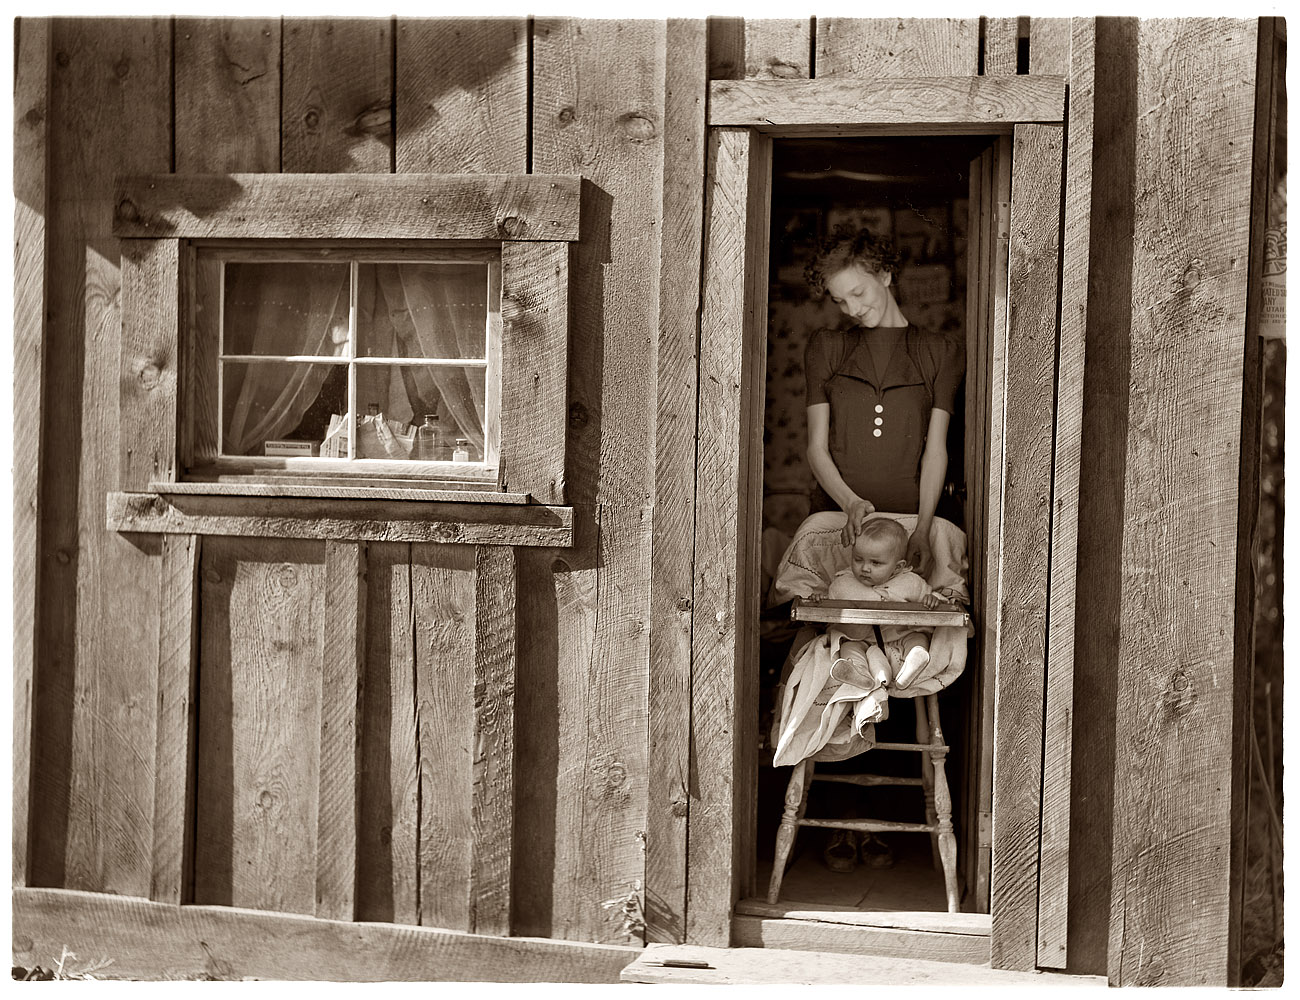 October 1939. Wife and baby of of the Ola self-help sawmill co-op president in the doorway of their home. Gem County, Idaho. View full size. Scanned from a 4x5 inch nitrate negative photographed by Dorothea Lange.